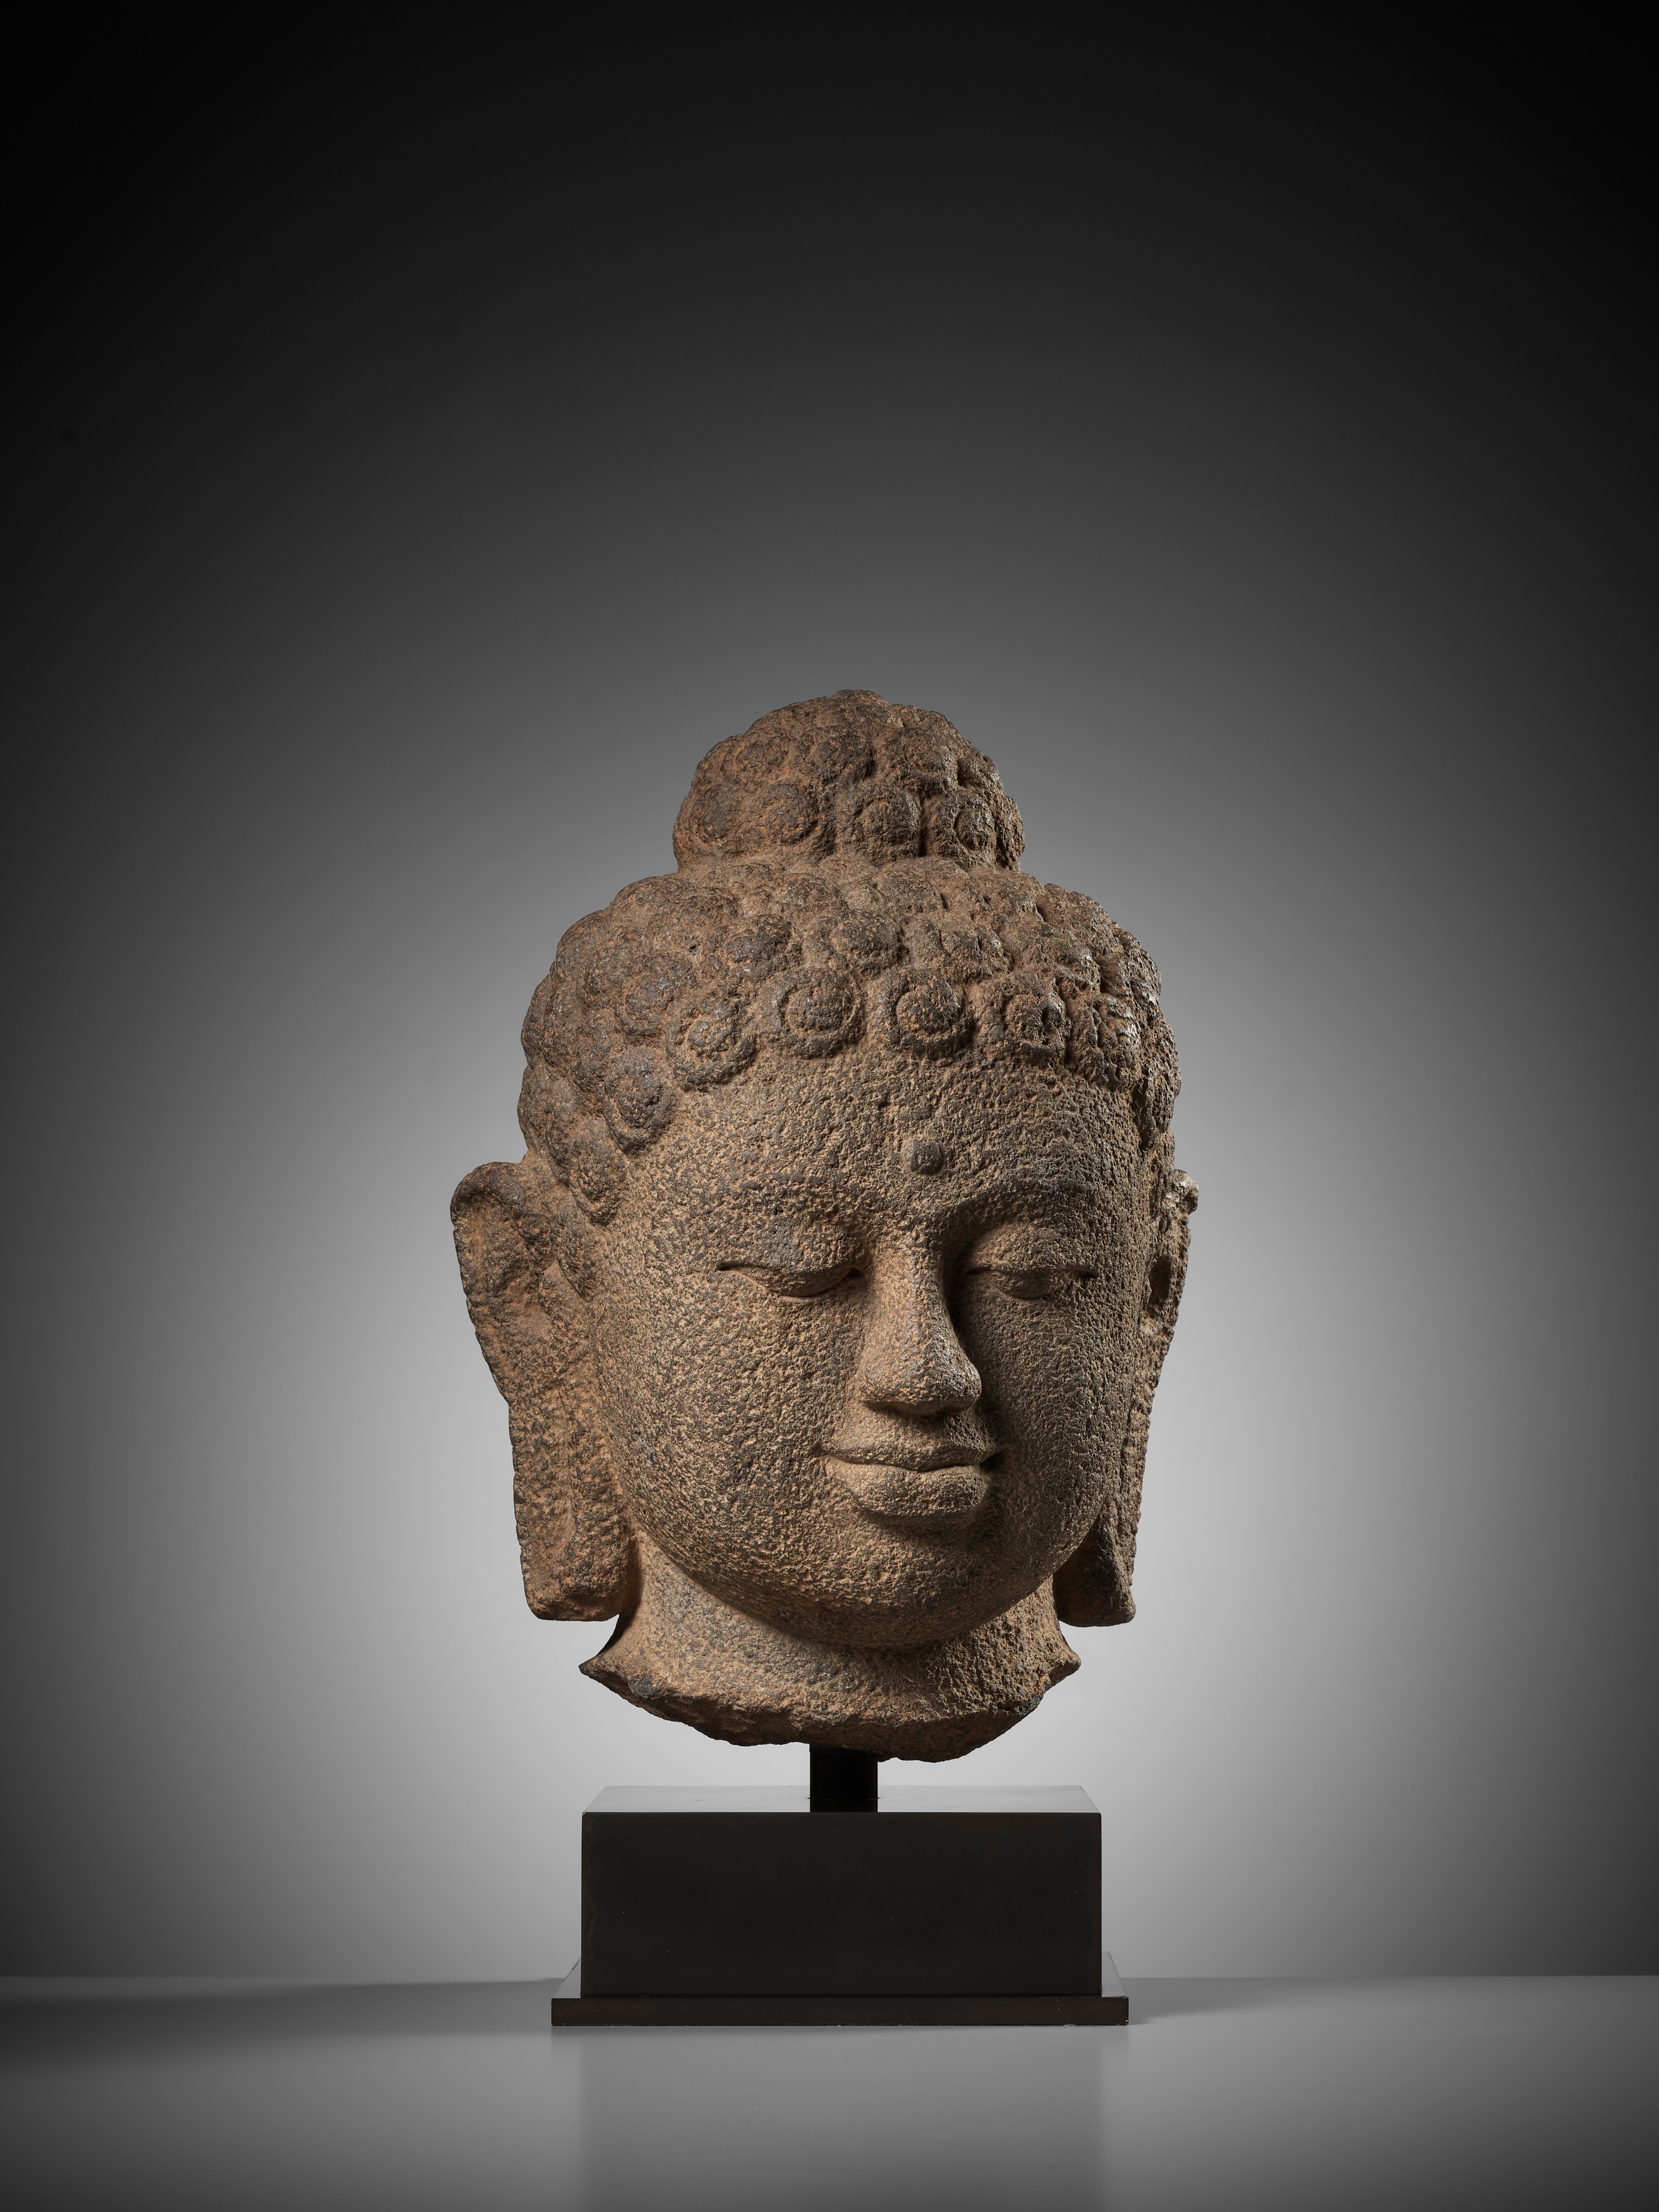 A LARGE ANDESITE HEAD OF BUDDHA, INDONESIA, CENTRAL JAVA, 9TH CENTURY - Image 3 of 10